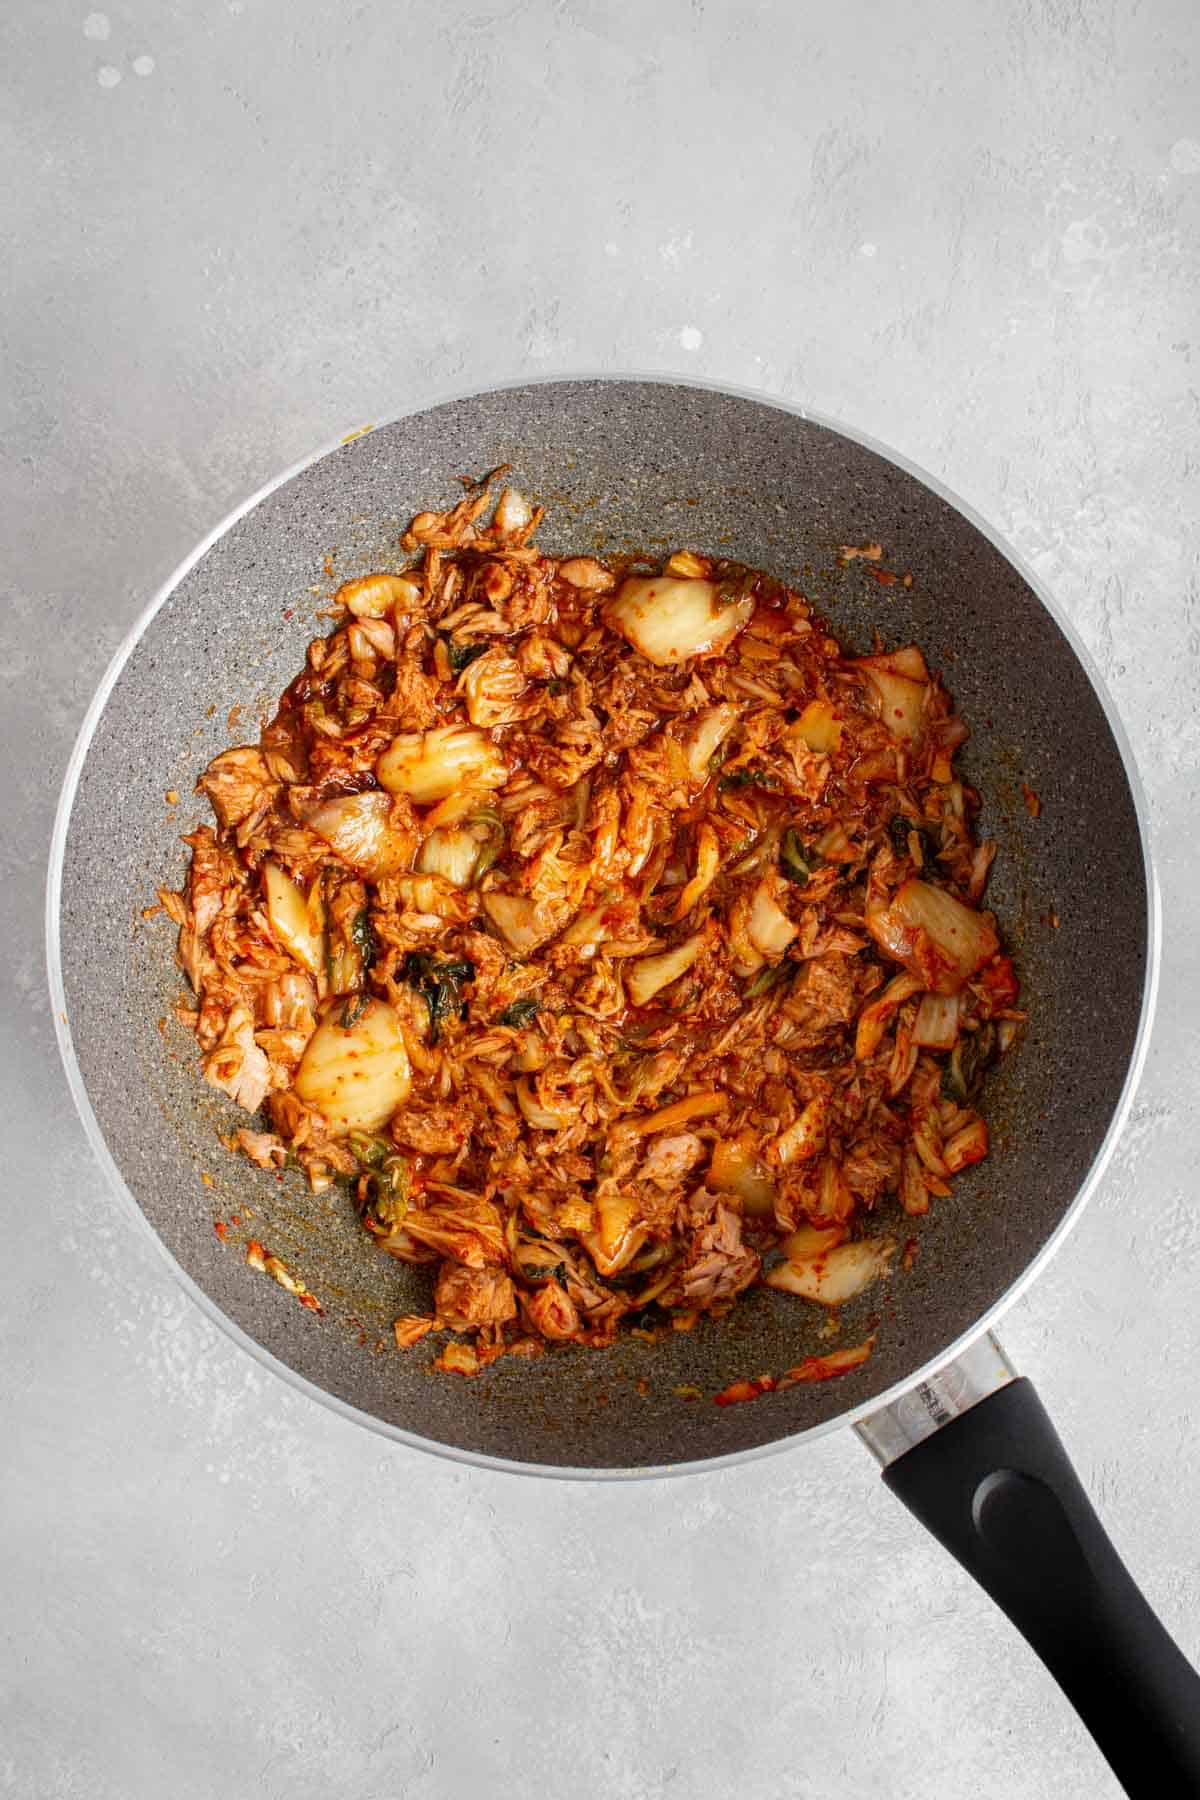 Kimchi, tuna, and sauces combined in a skillet.